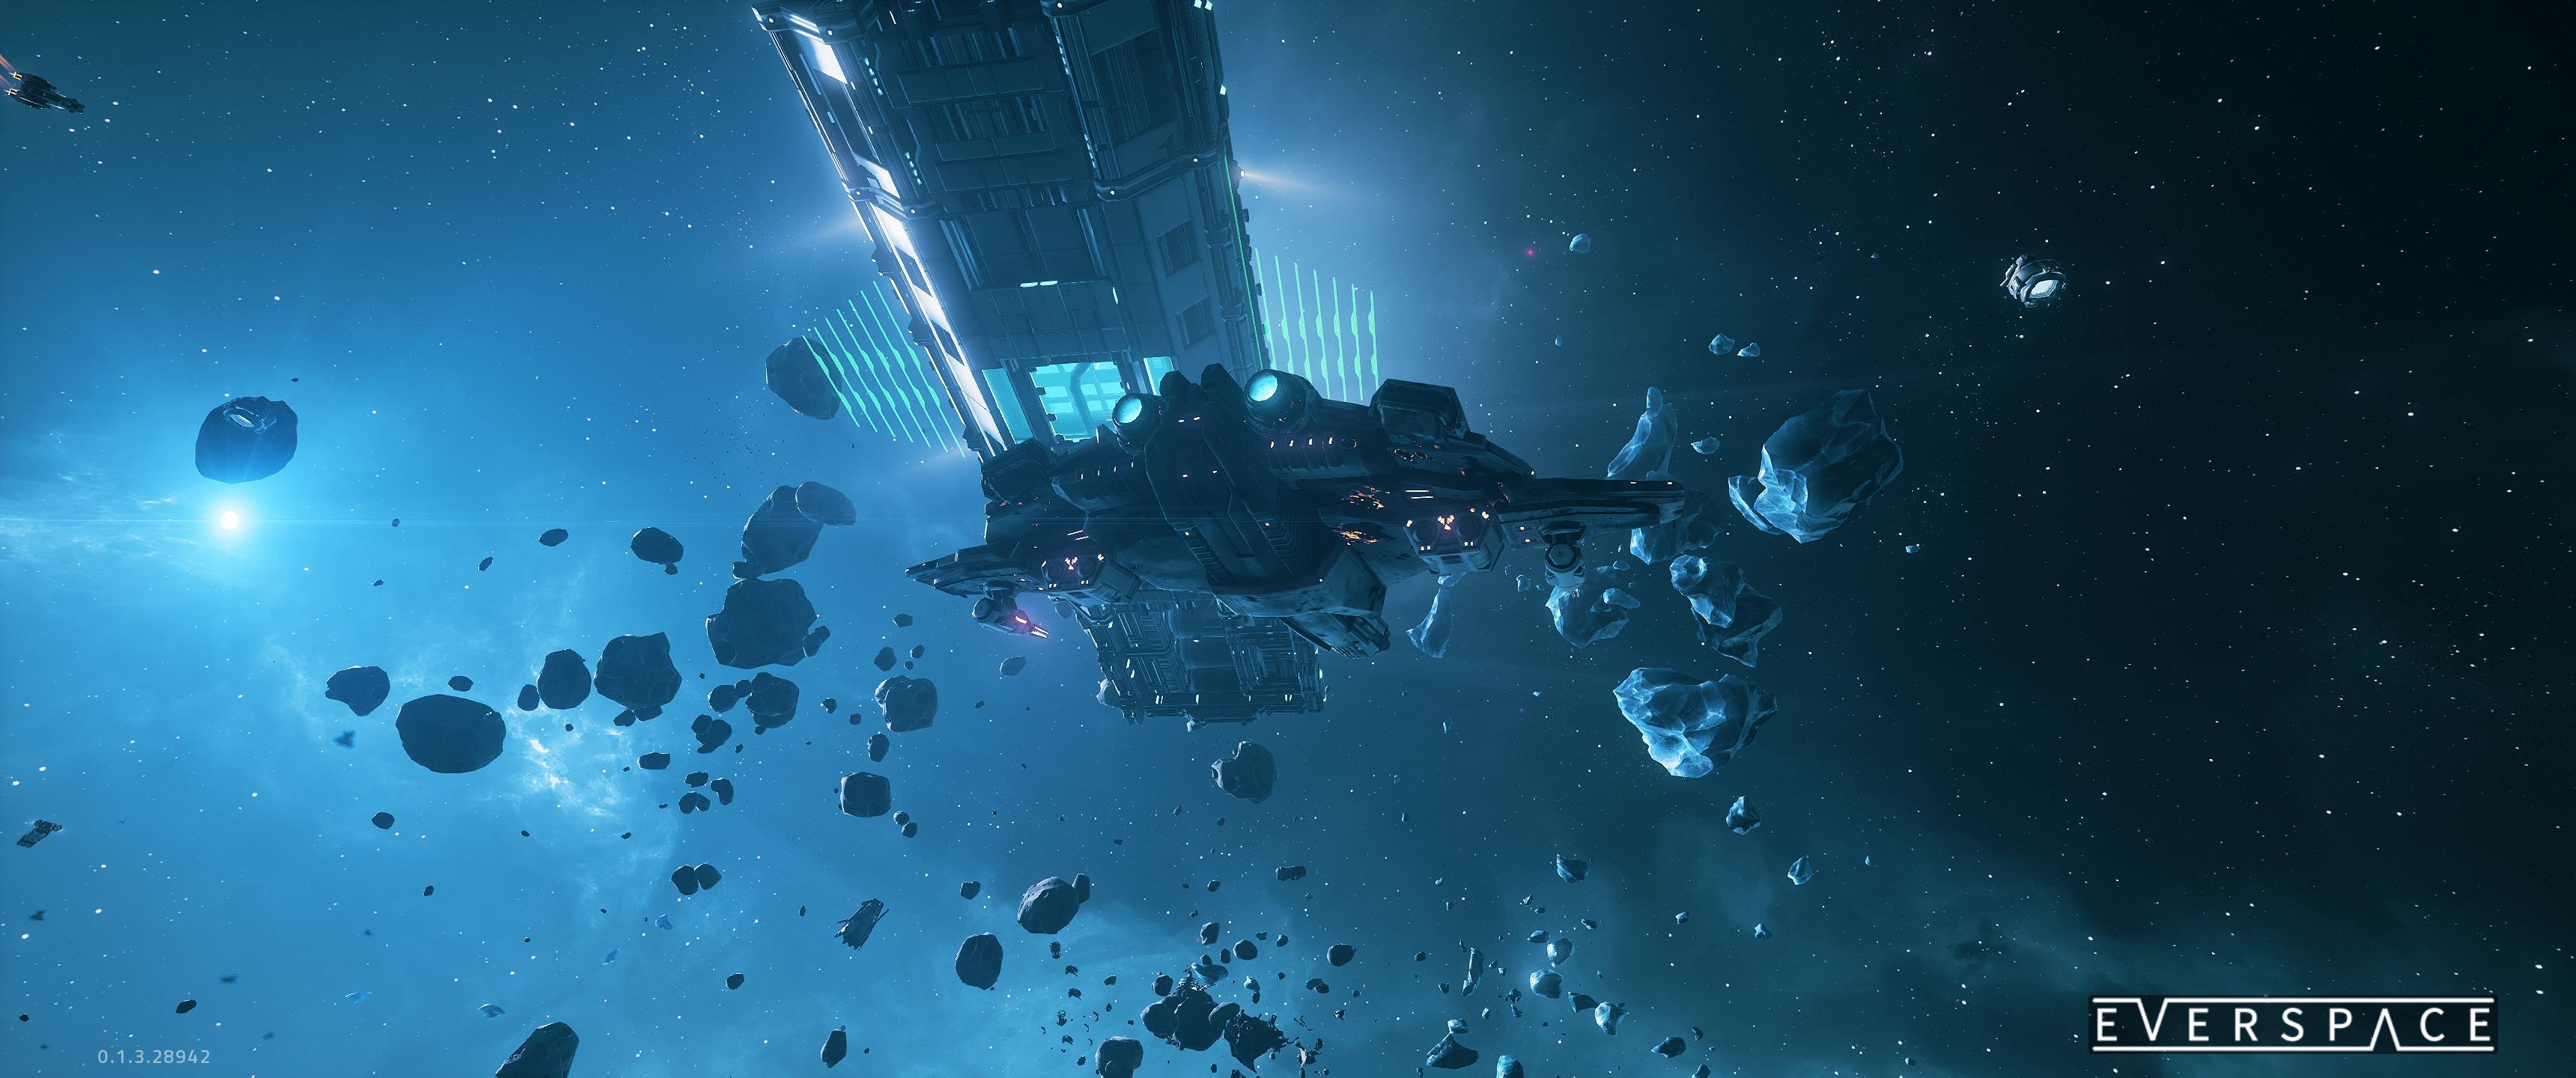 Everspace was released yesterday and supports 21:9